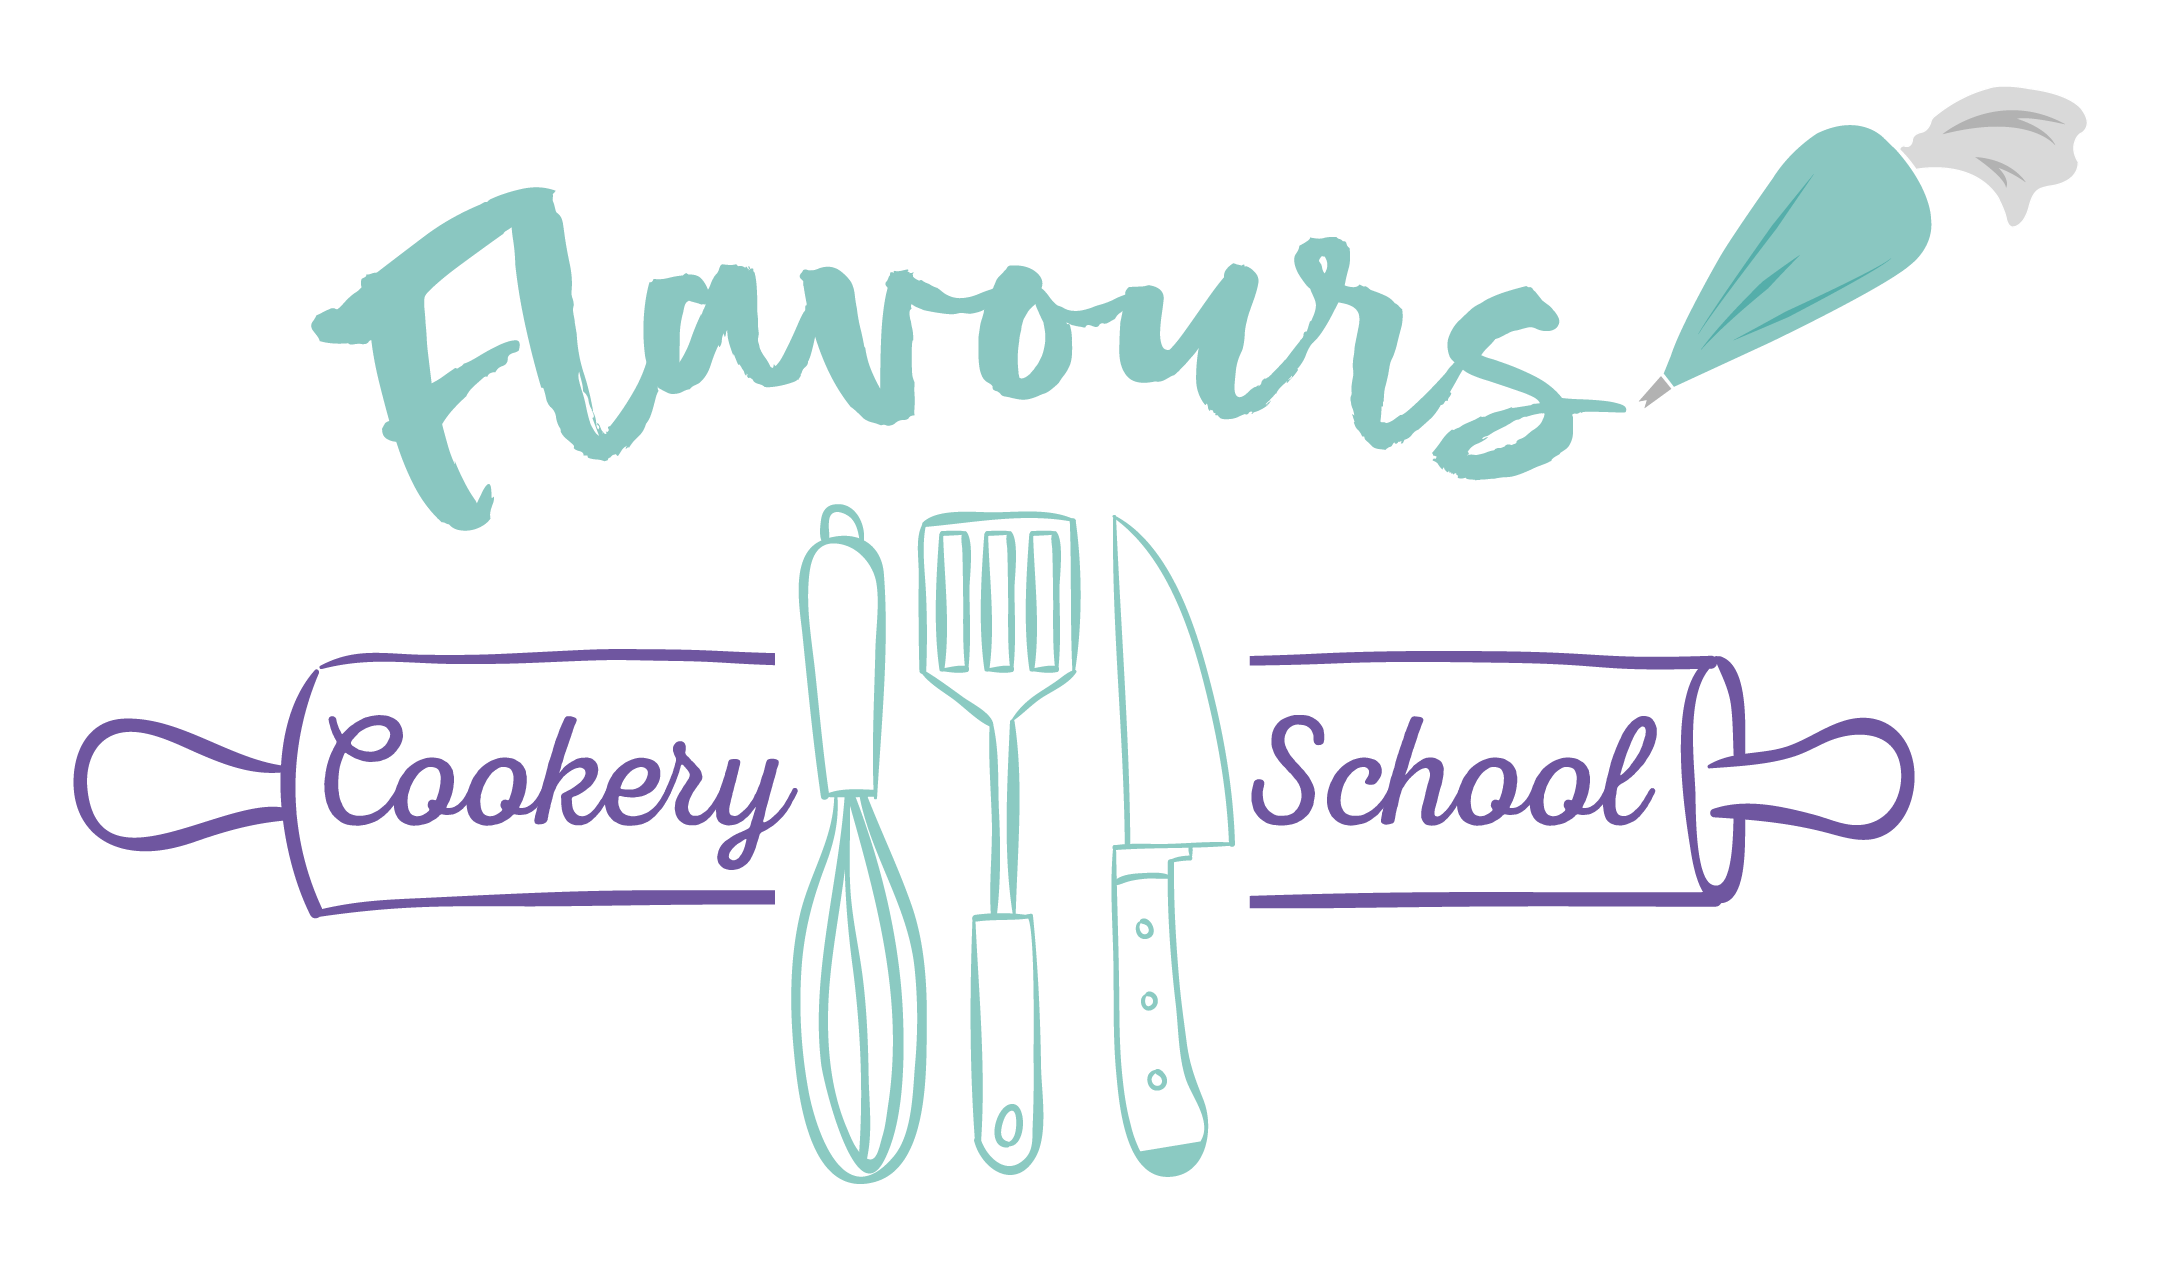 Flavours Cookery School